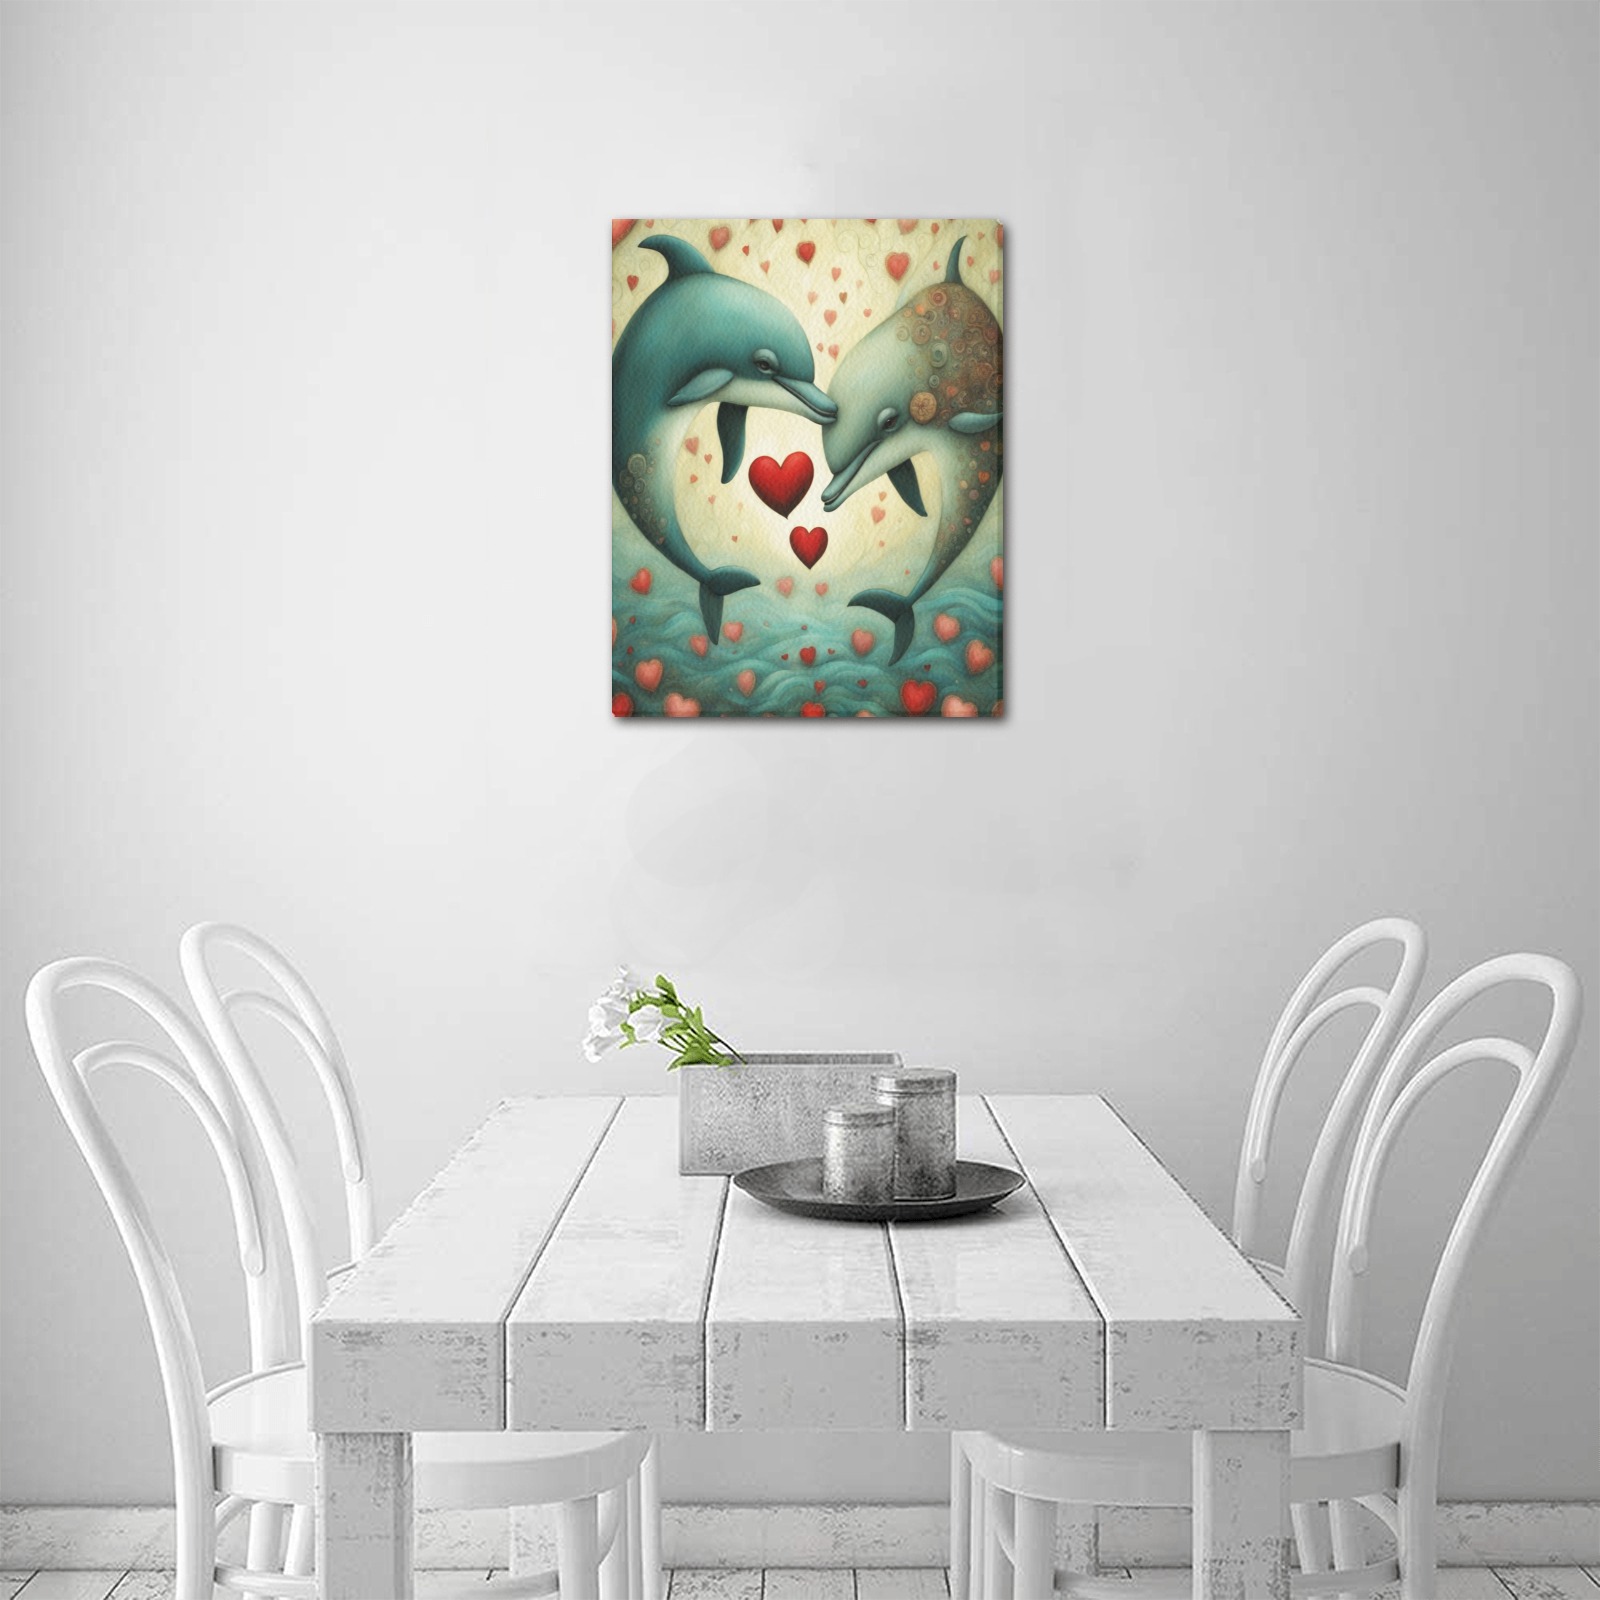 Dolphin Love 2 Upgraded Canvas Print 11"x14"